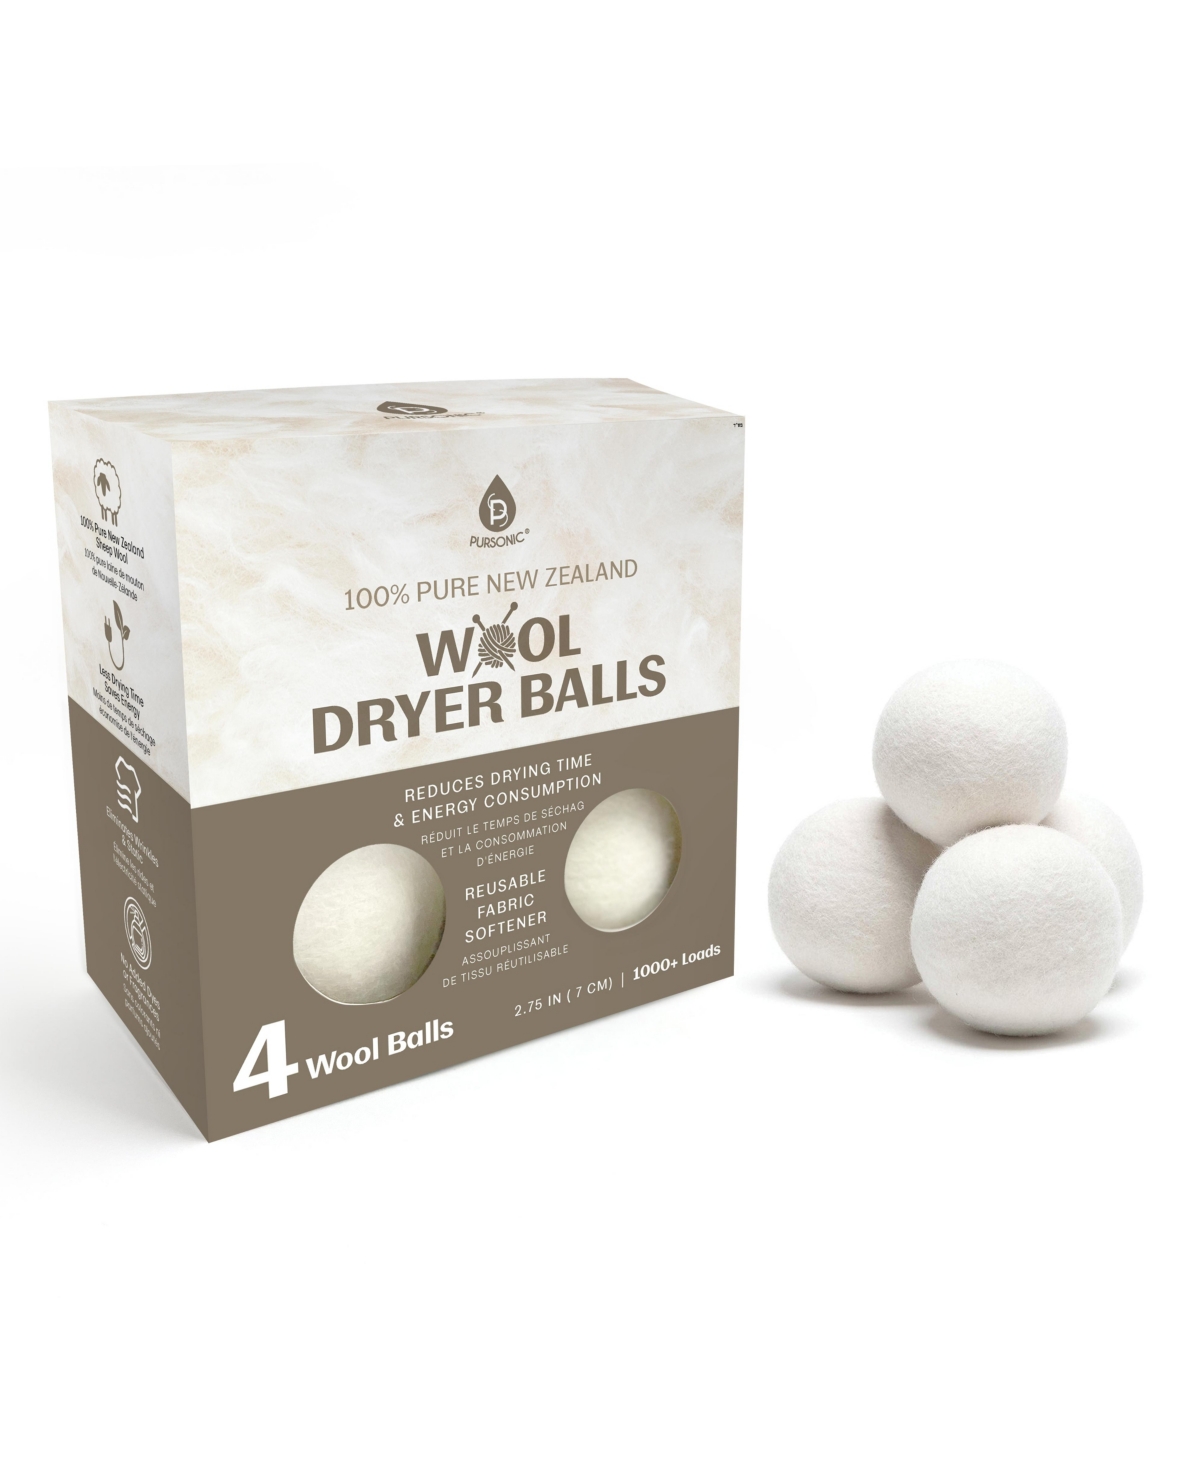 100% Pure New Zealand Wool Dryer Balls, Alternative to Dryer Sheets - Open White